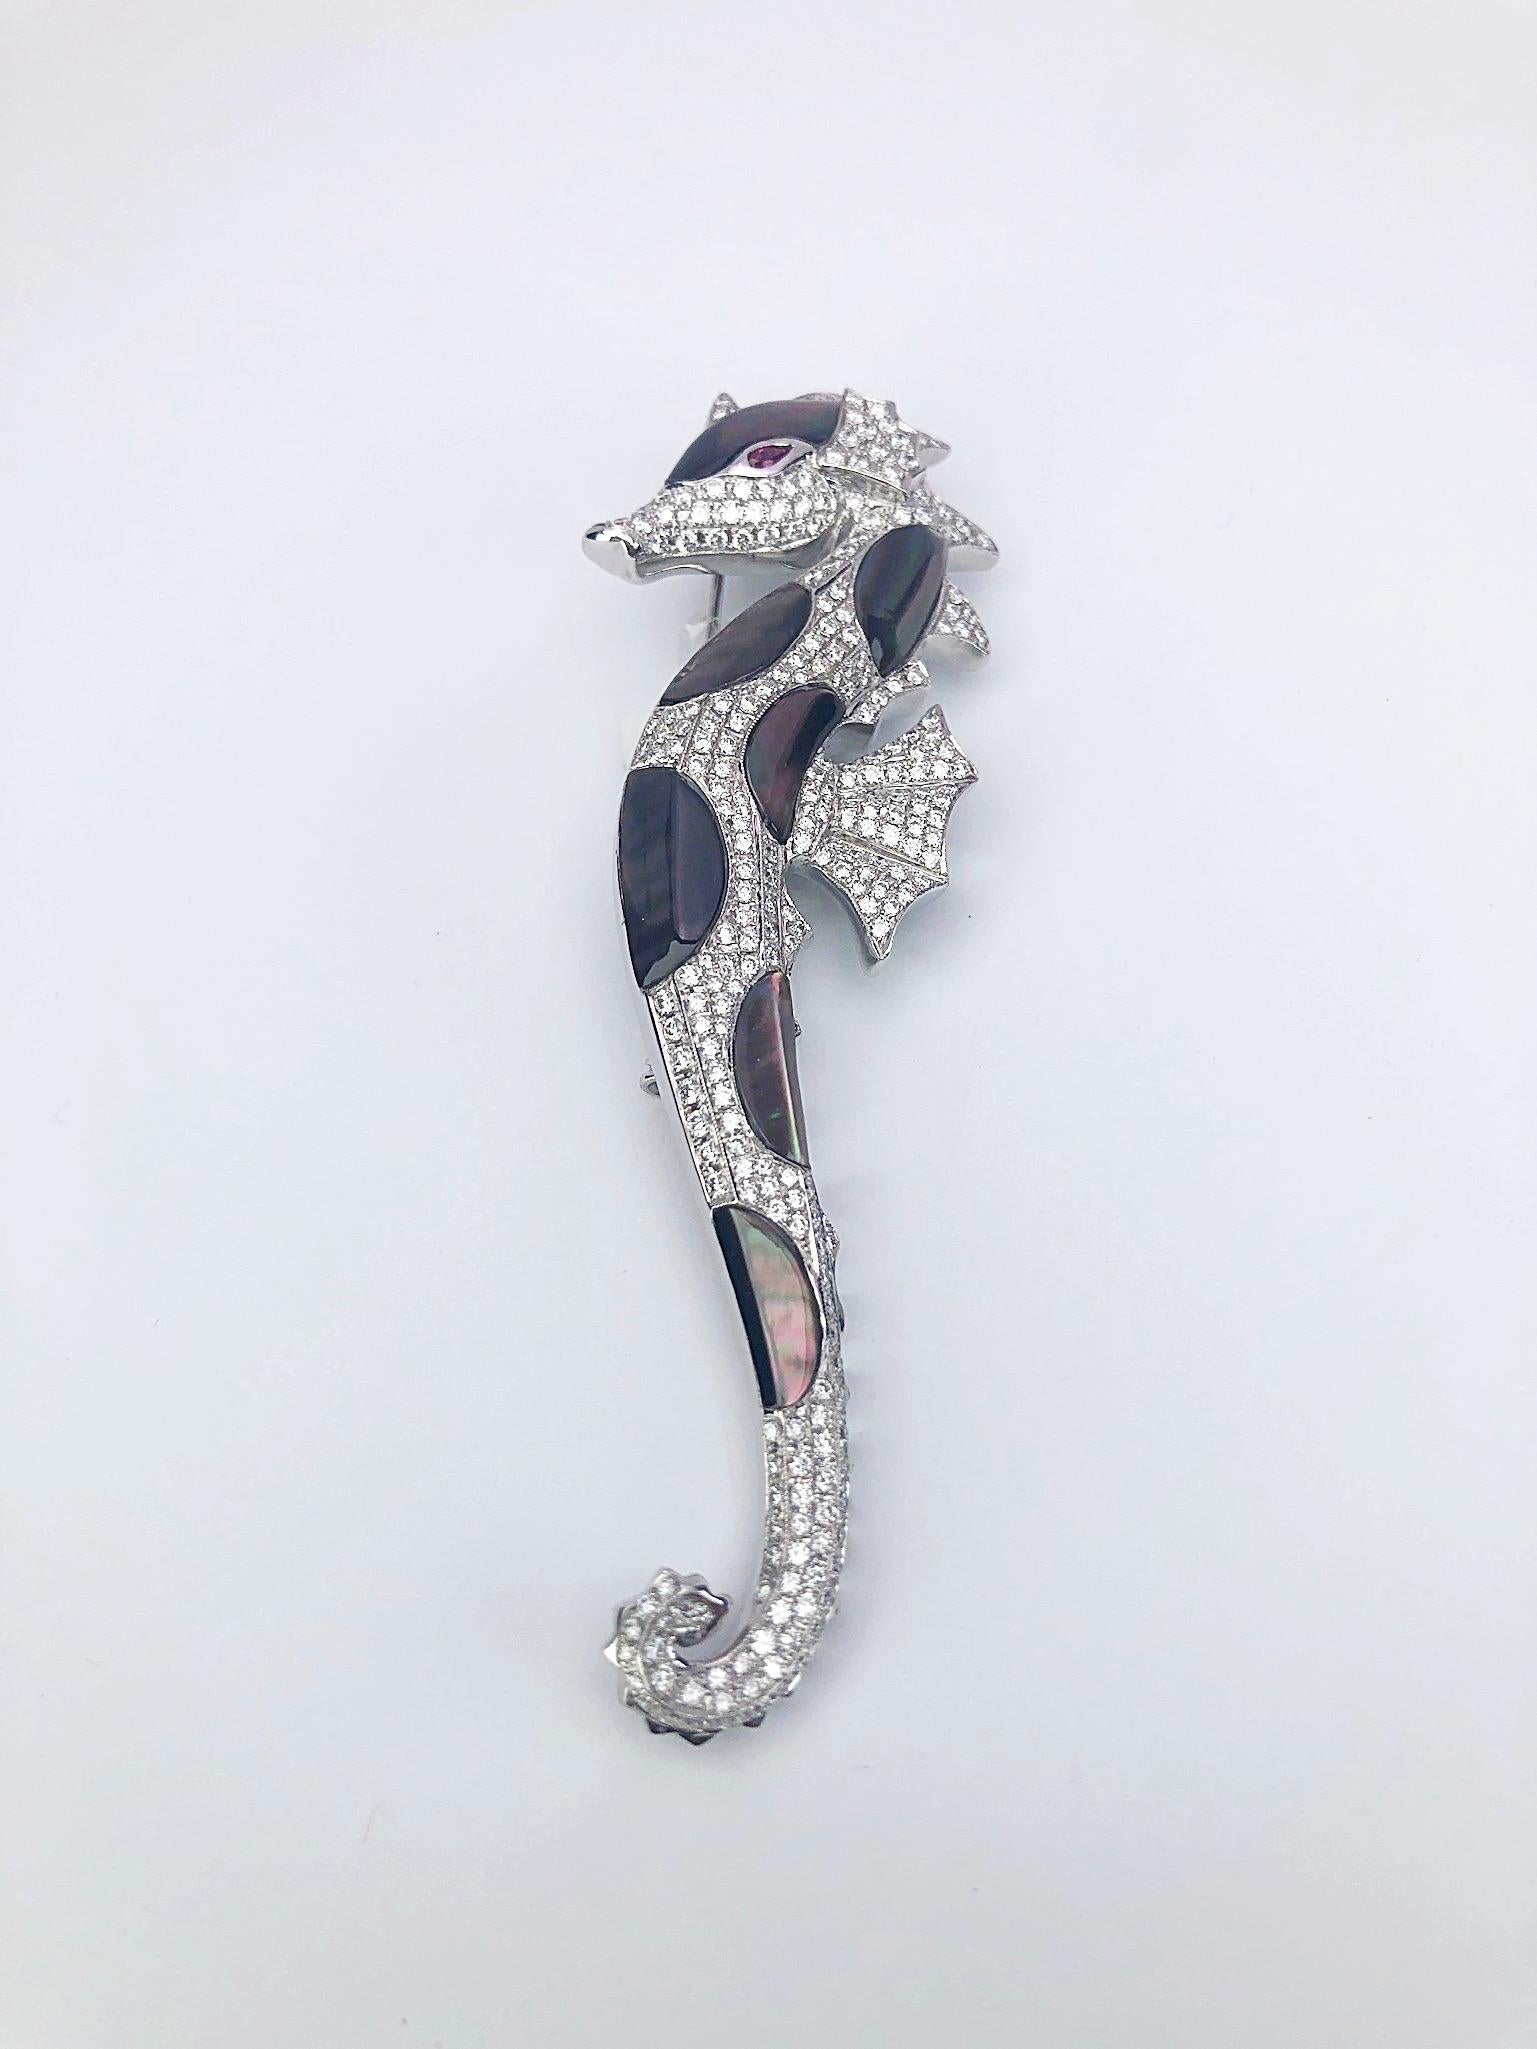 The seahorse is a symbol of luck and good fortune, an attribute of the sea. Considered to be a symbol of strength and power this seahorse brooch is the perfect example. Organic shapes of mother of pearl are set next to diamond pave to create the